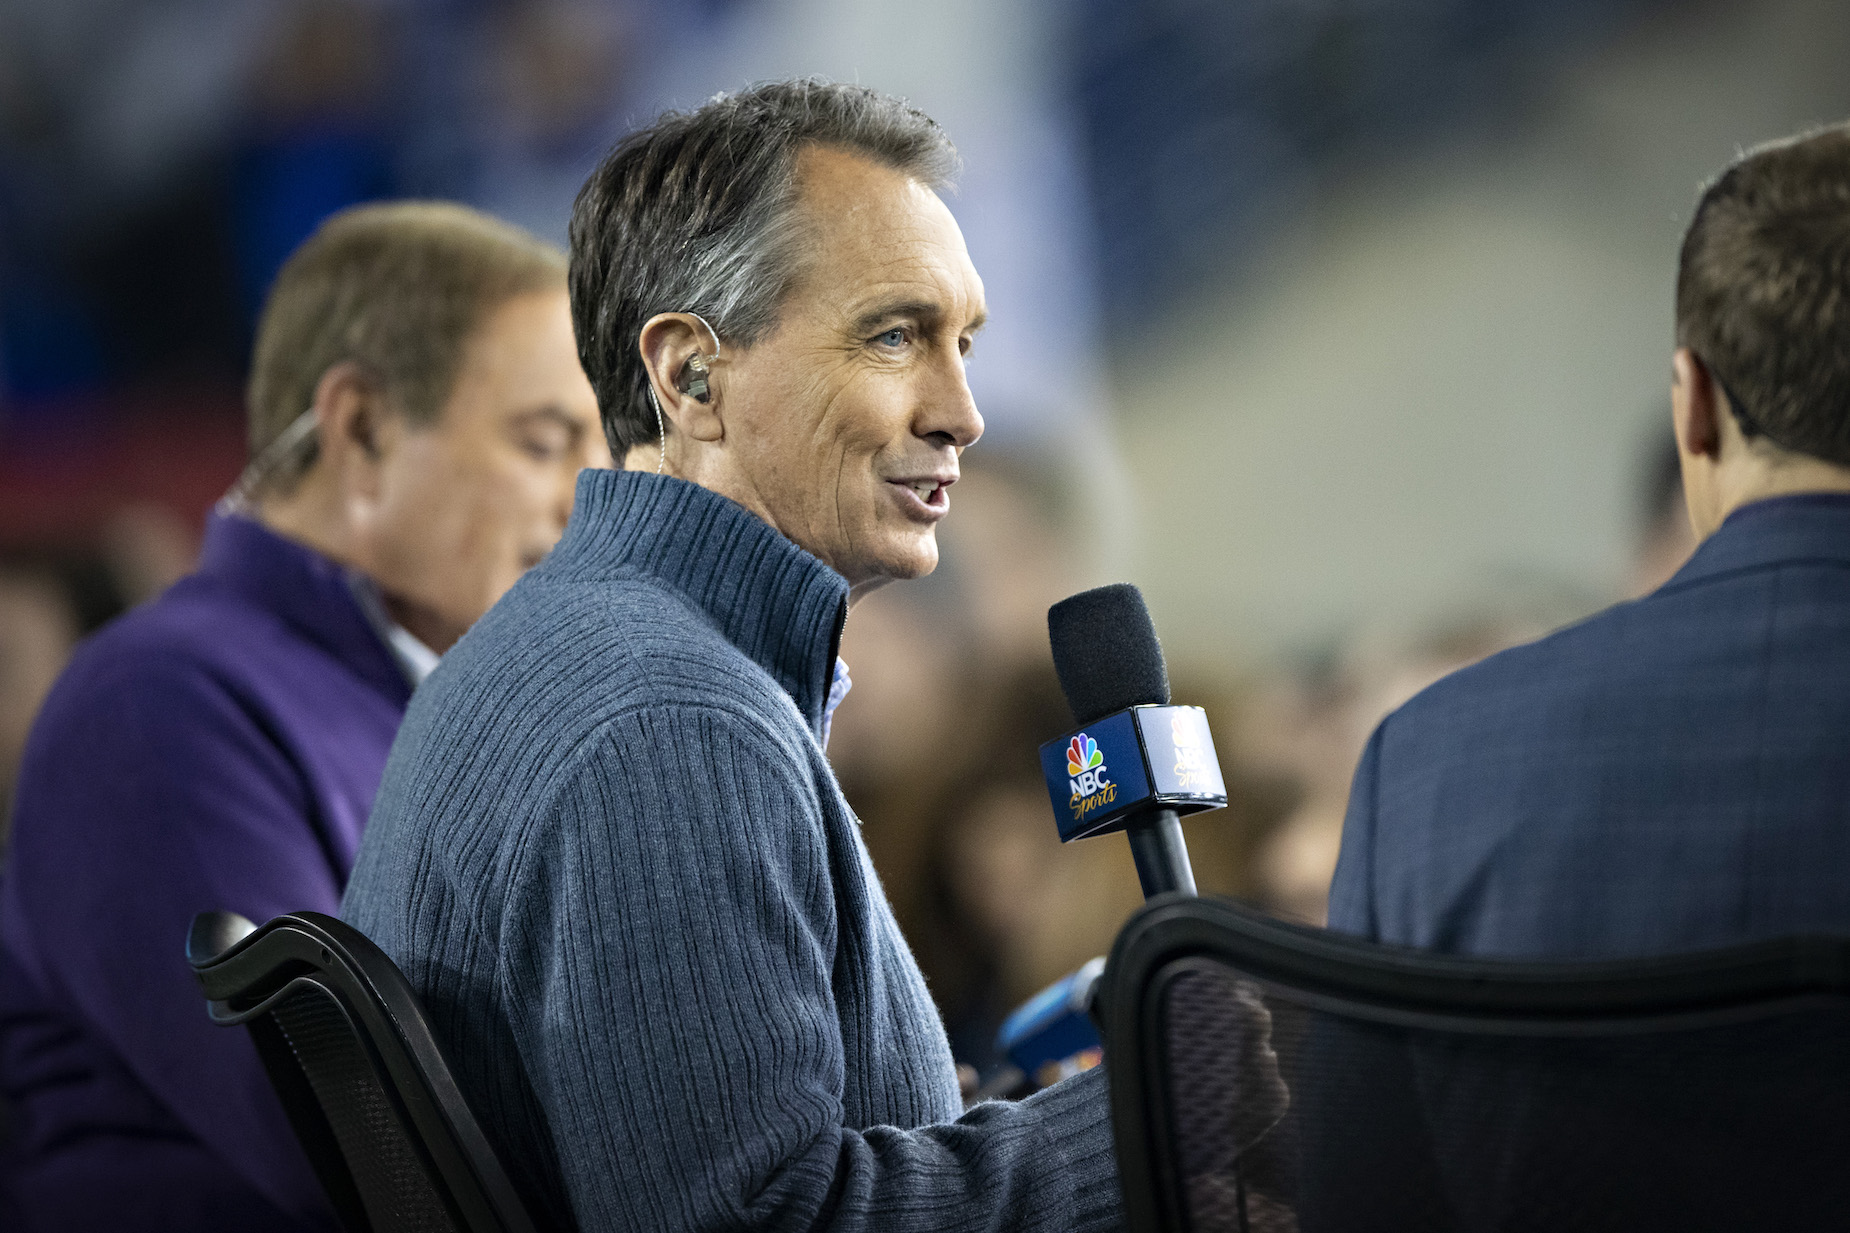 Due to social distancing, Cris Collinsworth won't be sliding into the NBC broadcast booth this season.